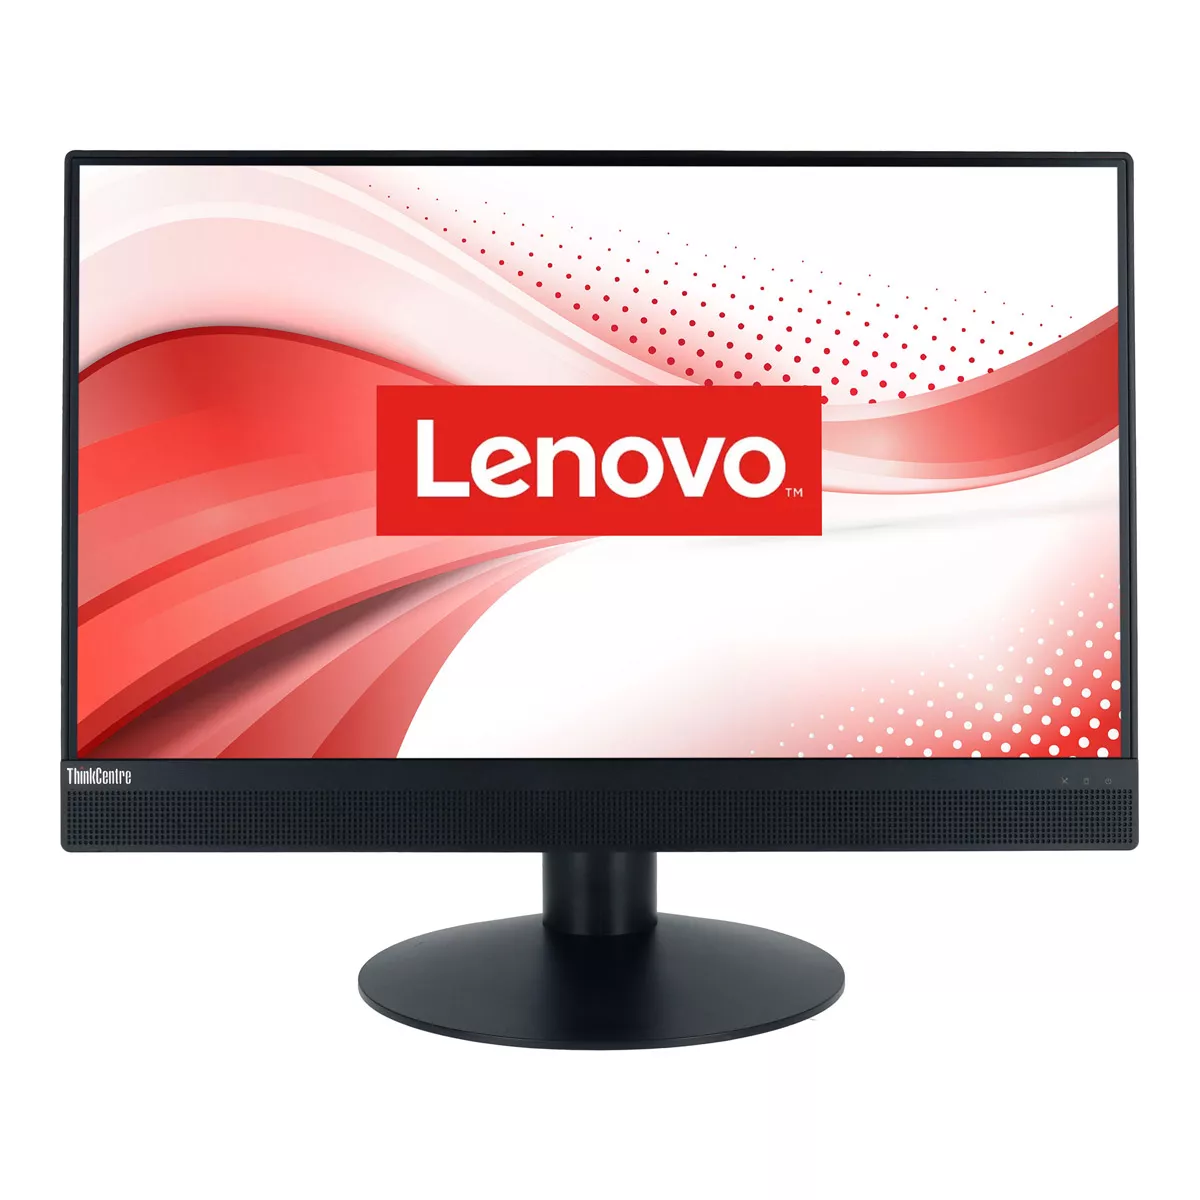 All-in-One Lenovo M820z Pentium Gold G5400 21.5 Zoll 1920x1080 8 GB DDR4 240 GB SSD A+